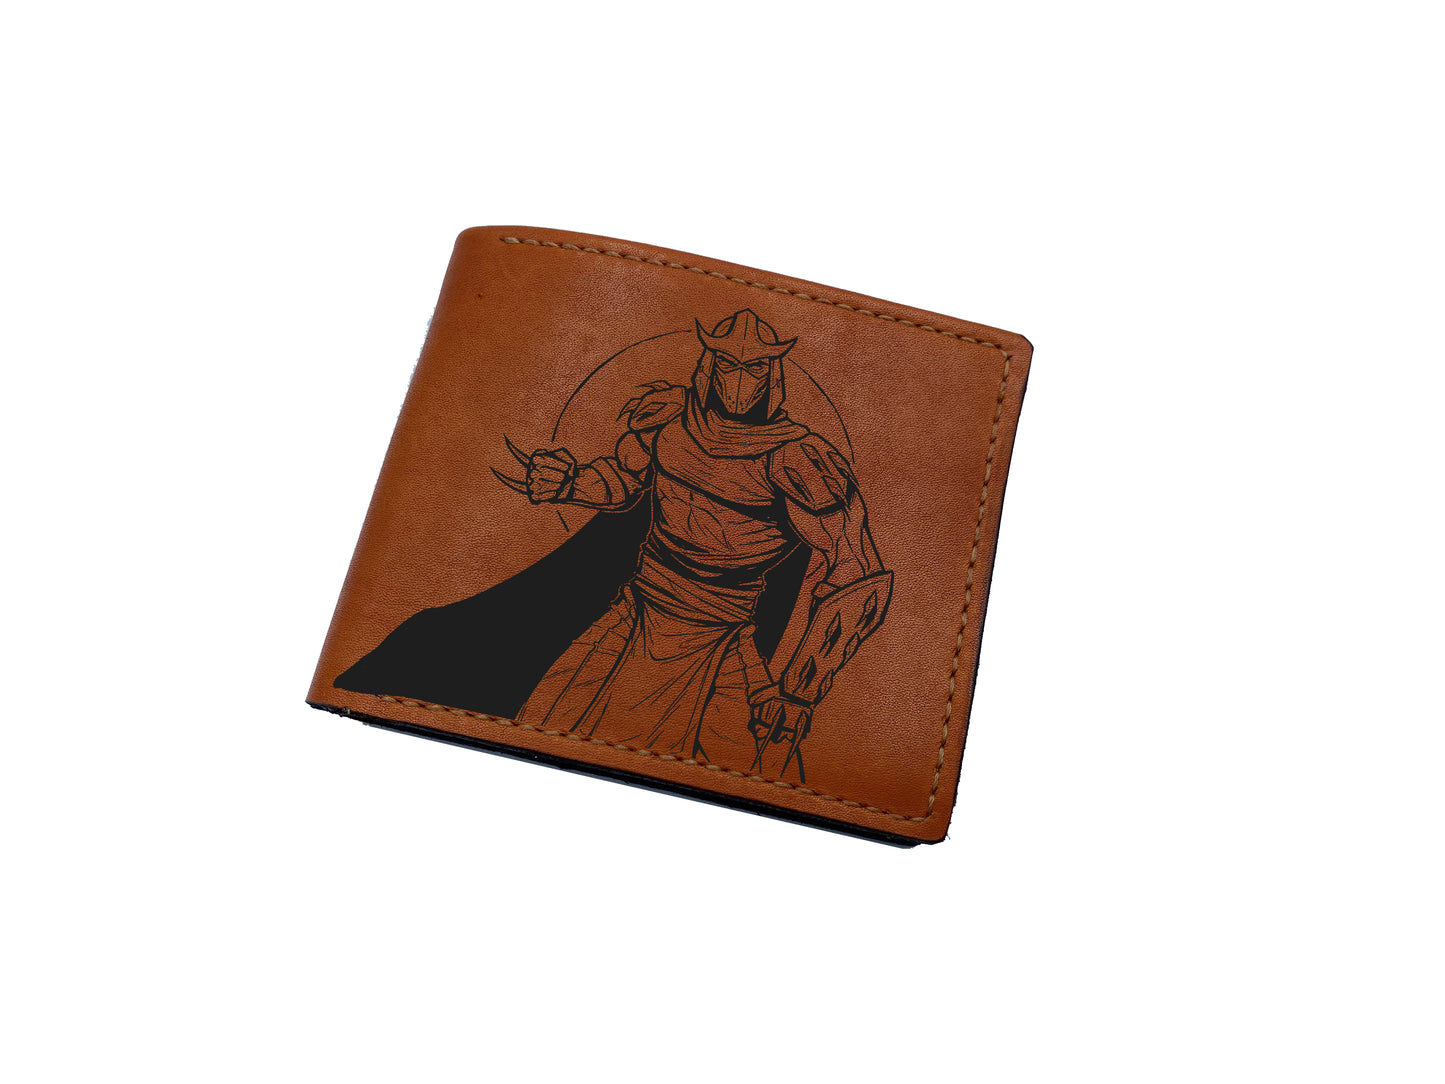 Mayan Corner - Personalized genuine leather handmade wallet, leather gift ideas for him, ninja turtle leather art wallet - 0111229